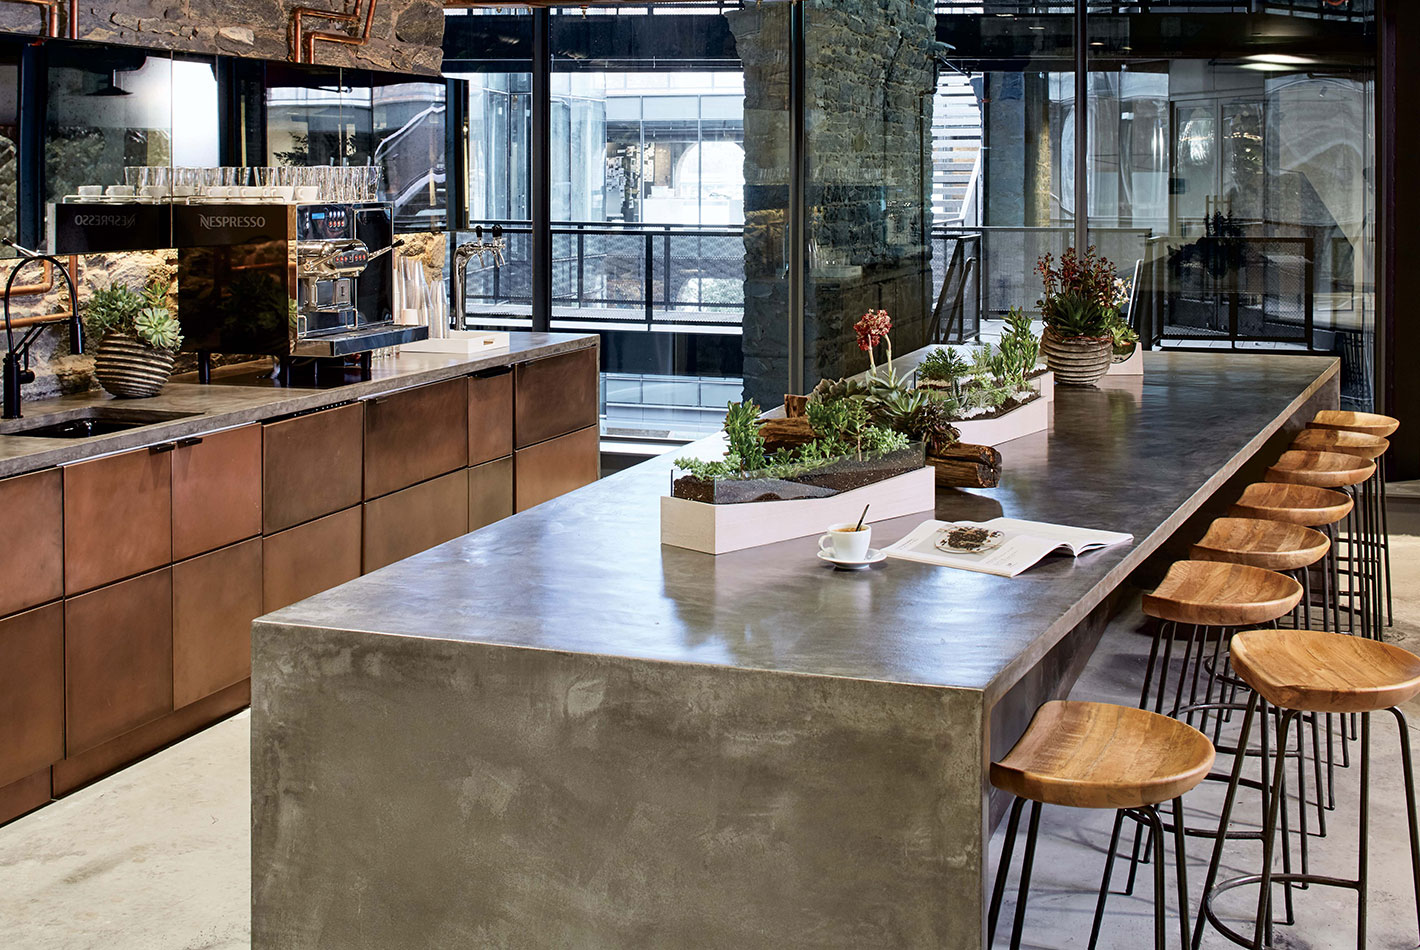 Polished concrete counters and copper-faced cabinets create a casual dining area at West Elm Headquarters.